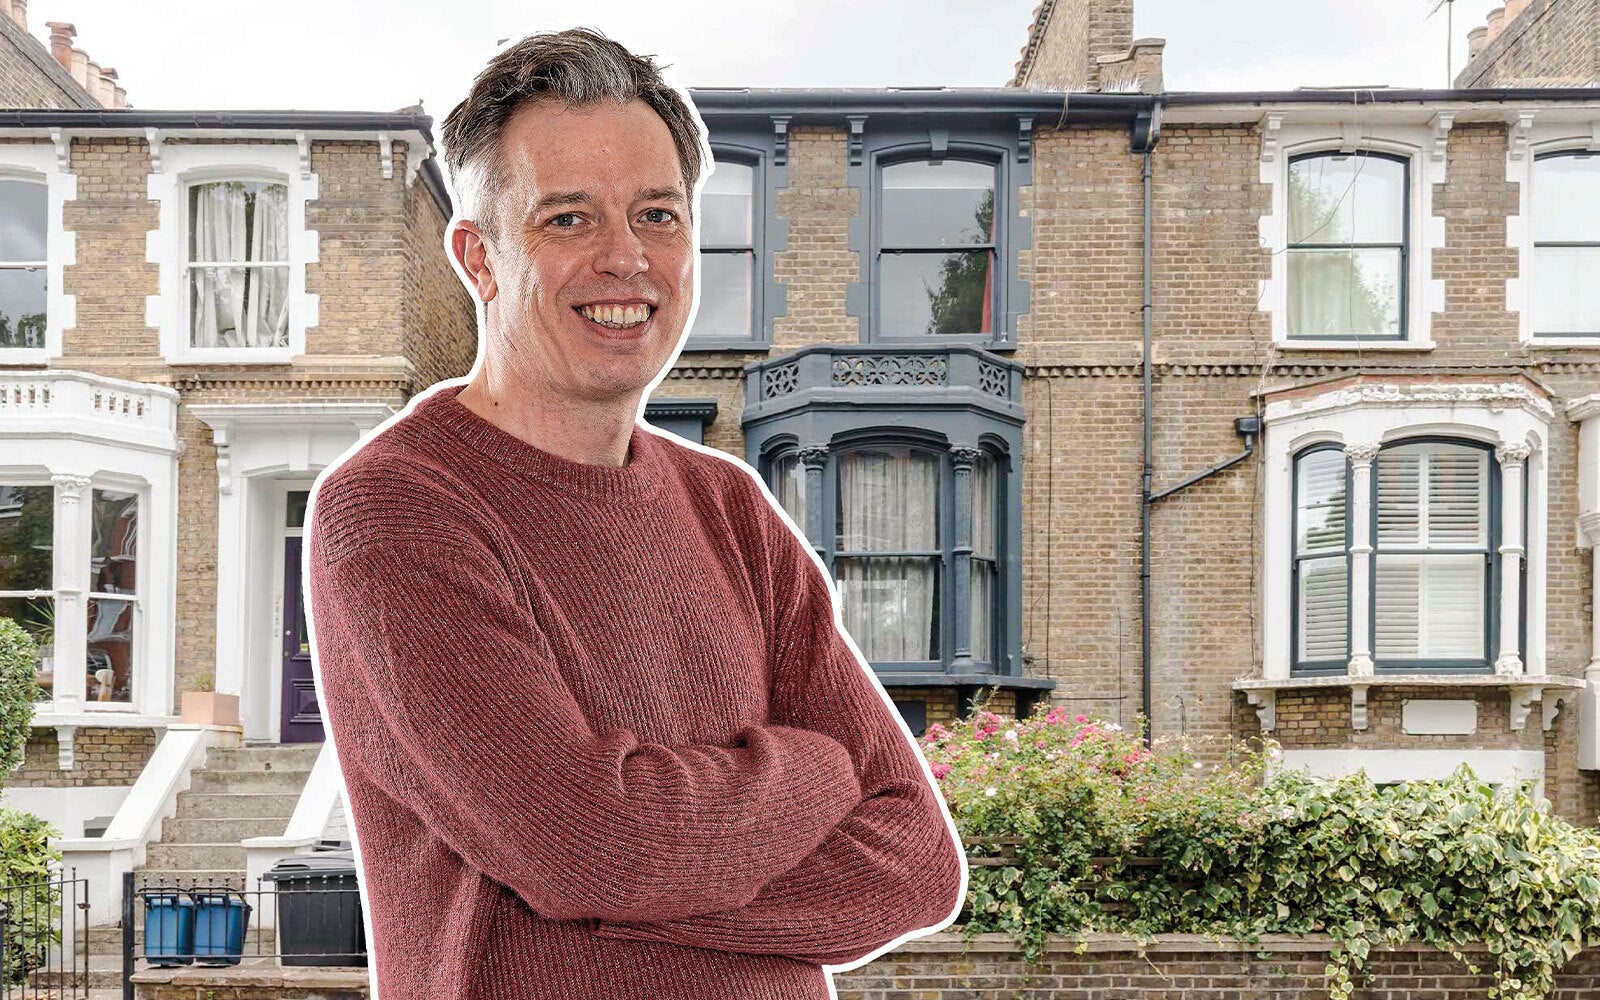 'Young people are giving up on home ownership - we need to help them'